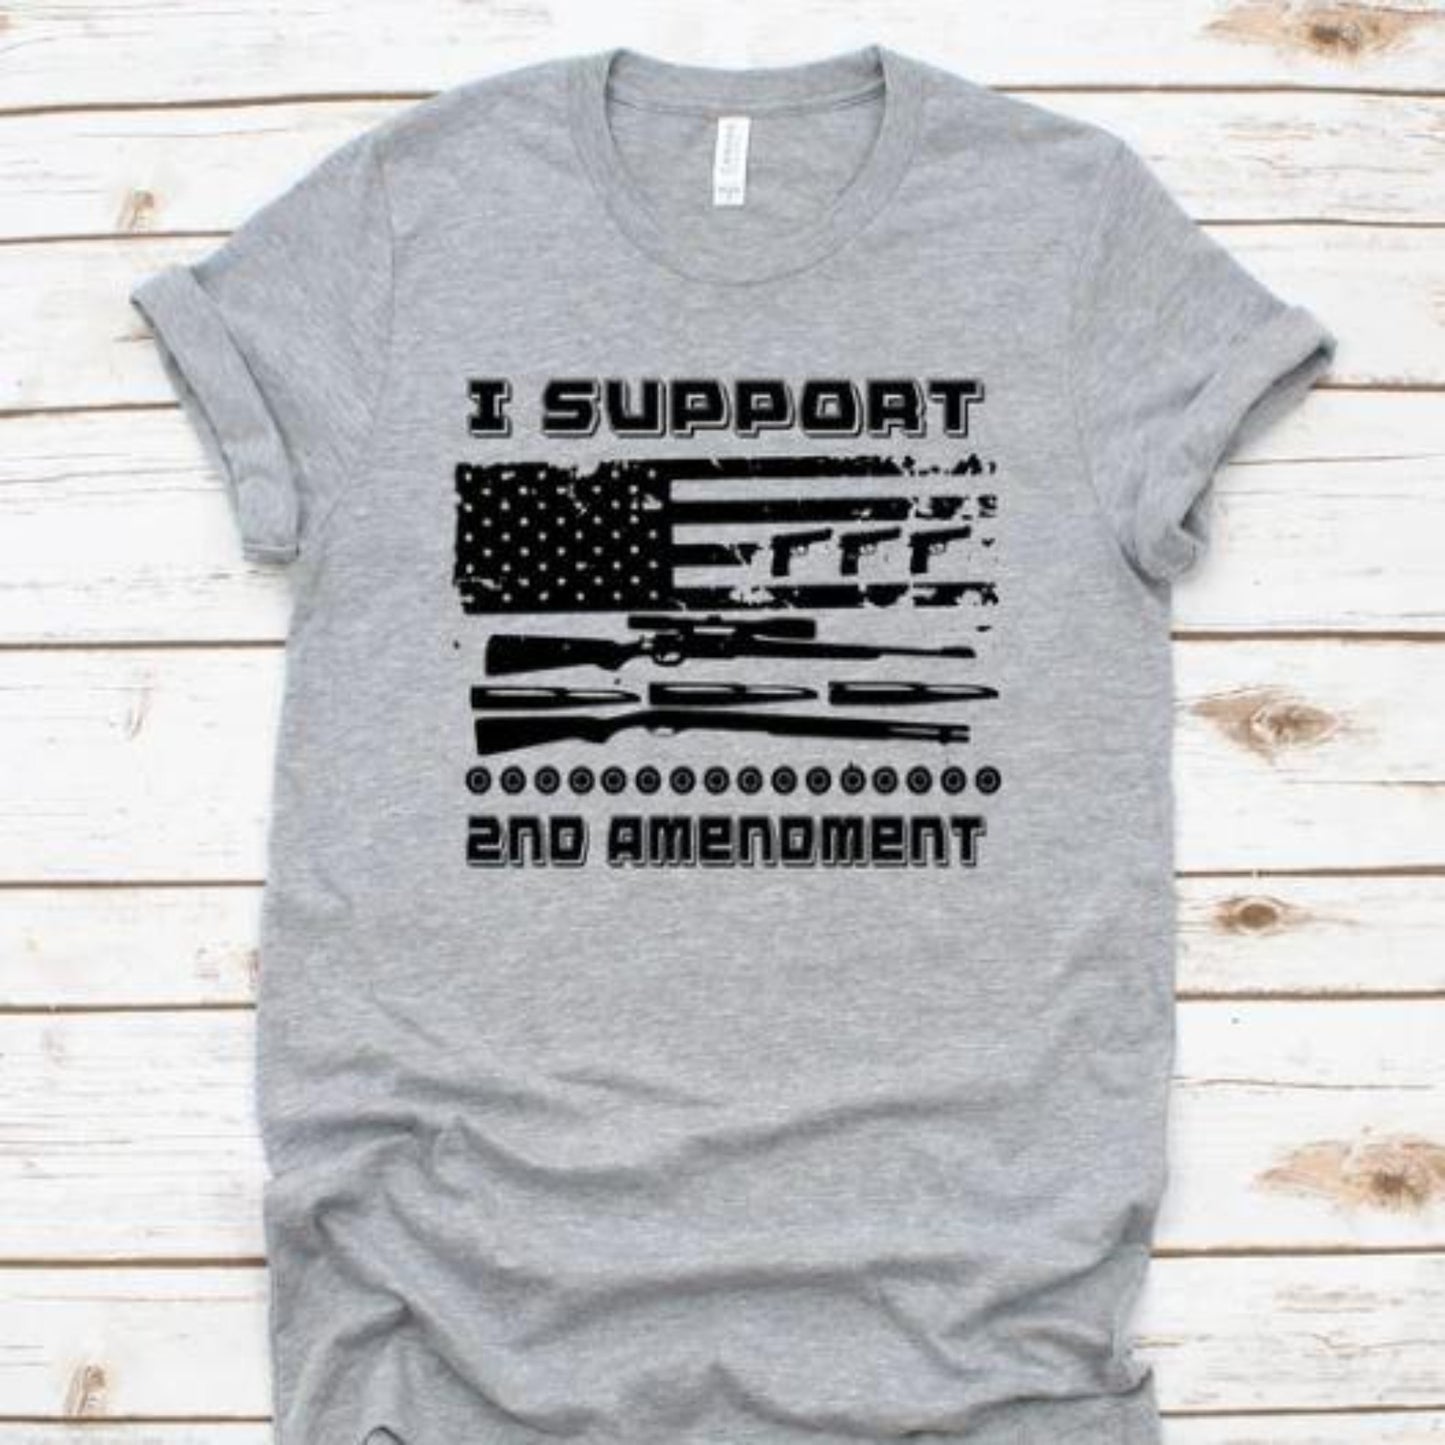 support_2nd_amendment specialty tee casual wear